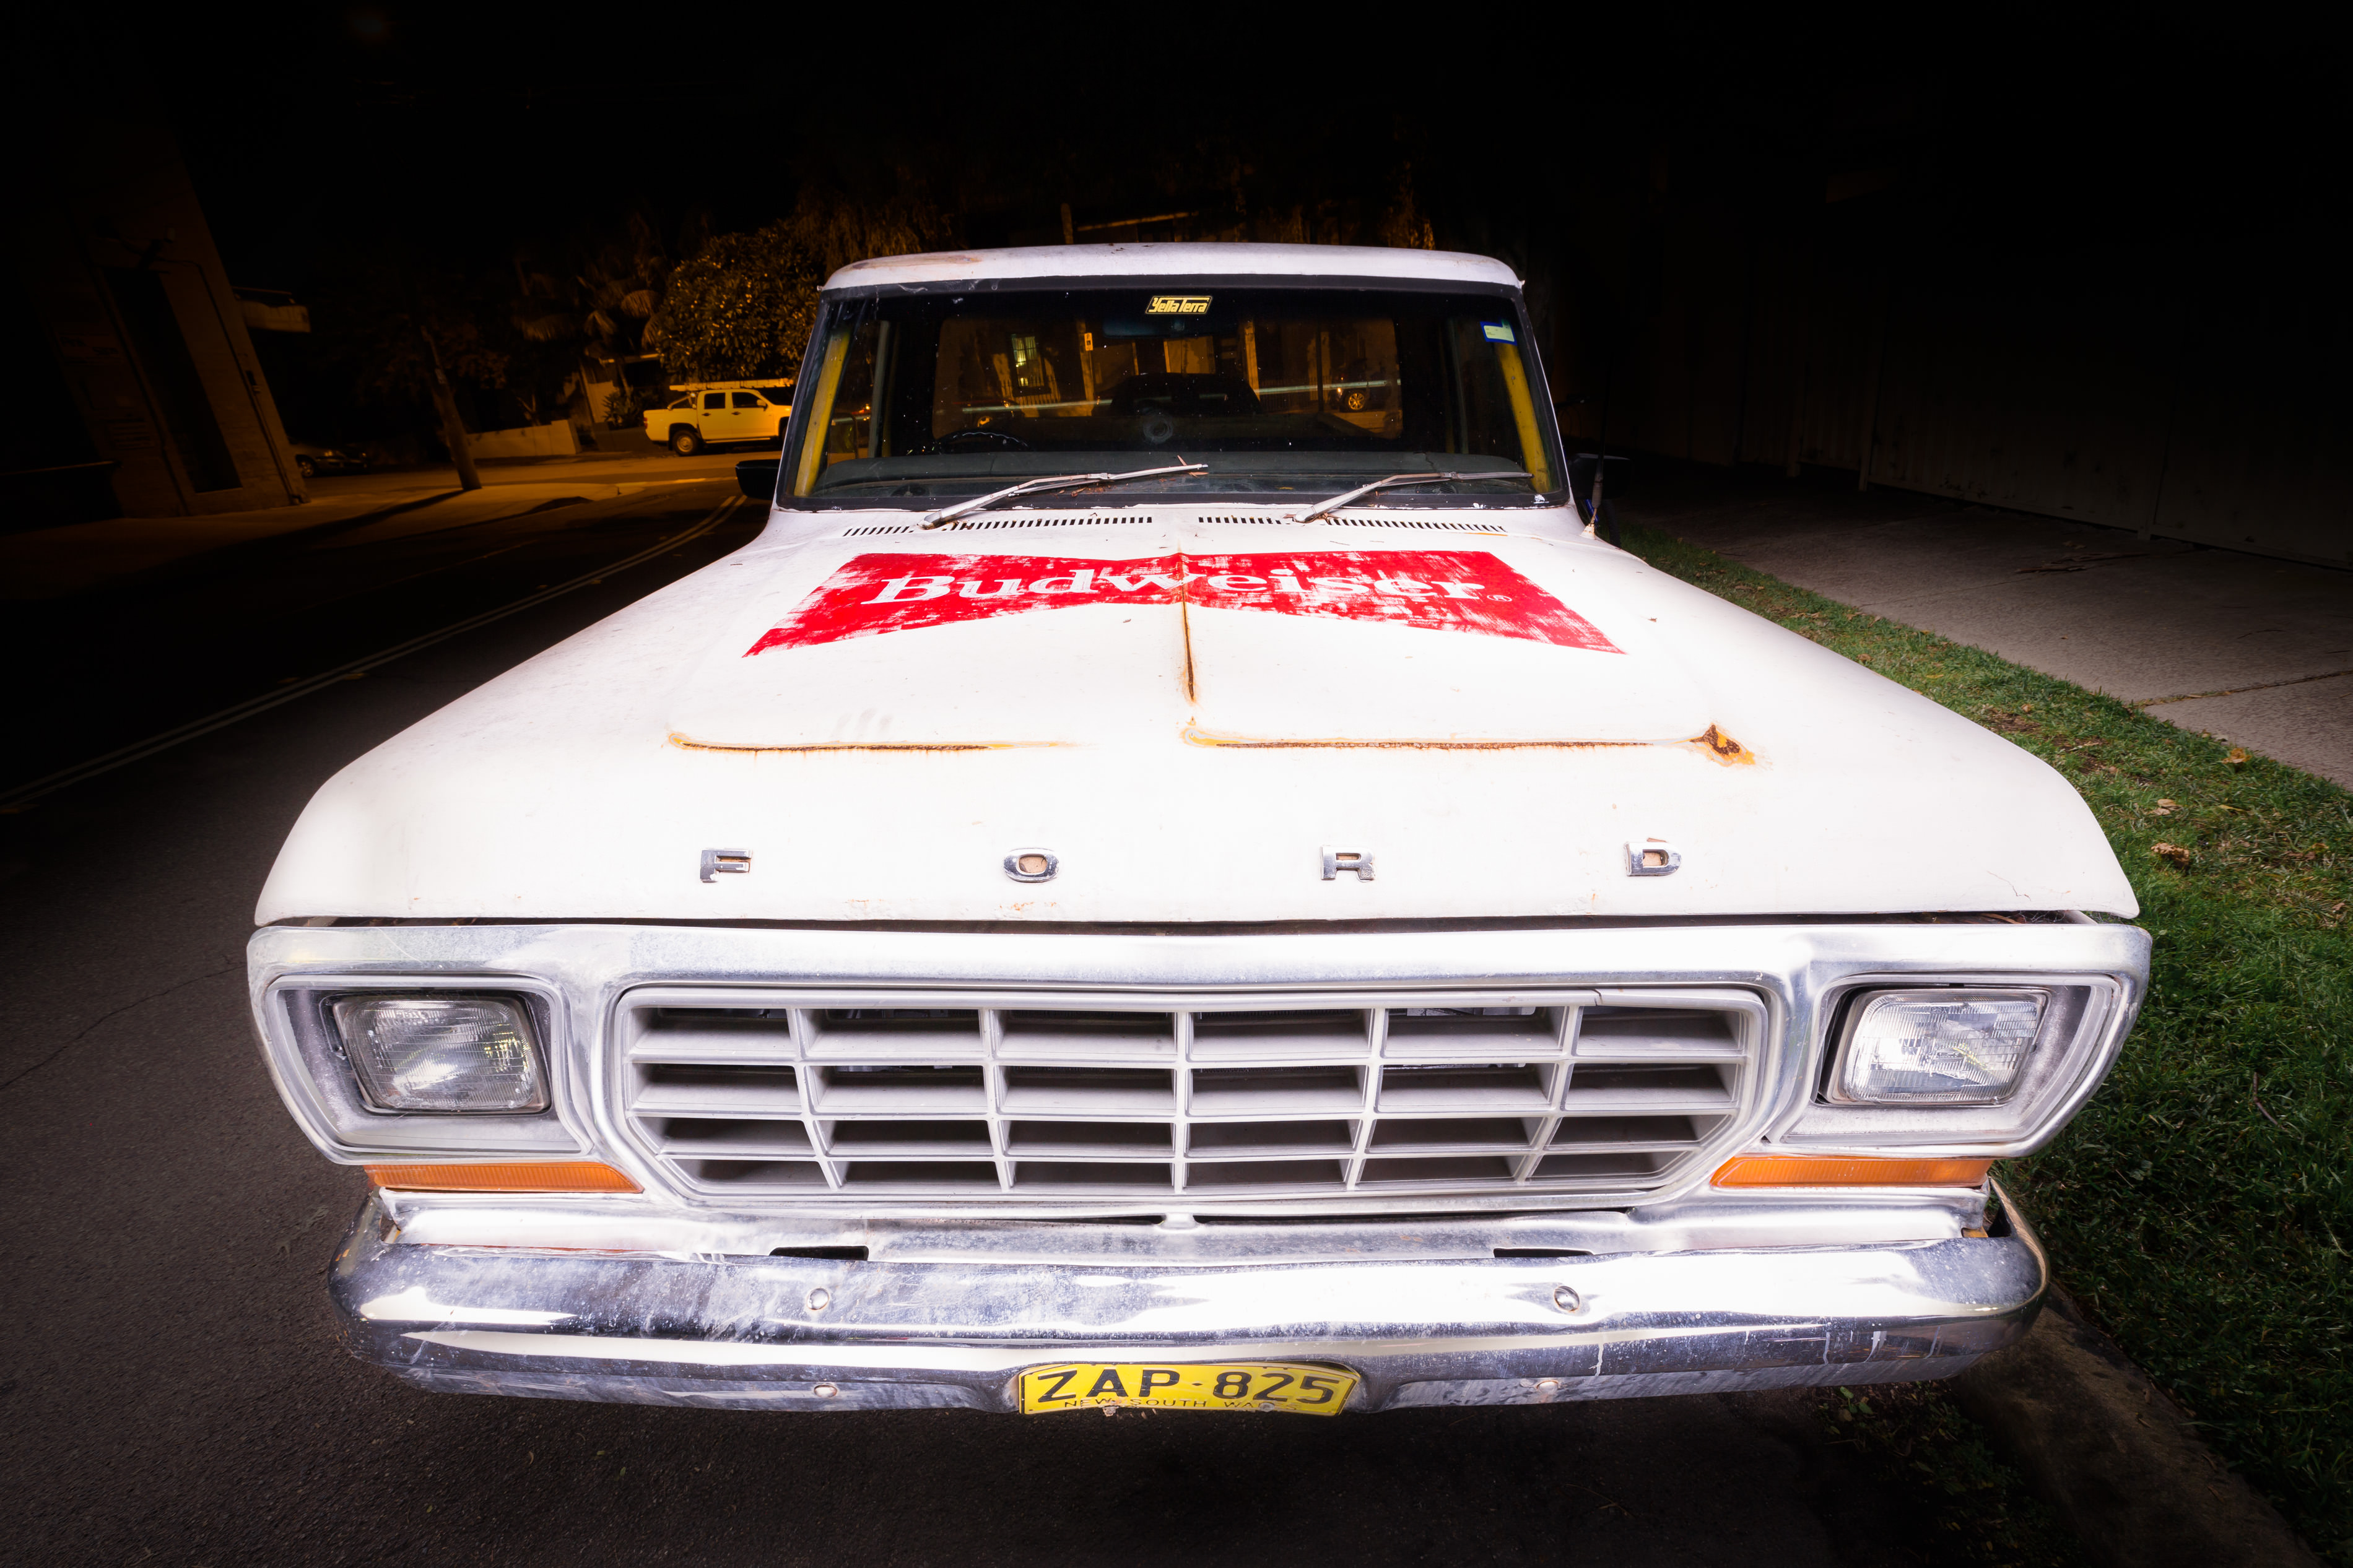 Budweiser Ford F150 Truck Long Exposure night automotive photography & light painting